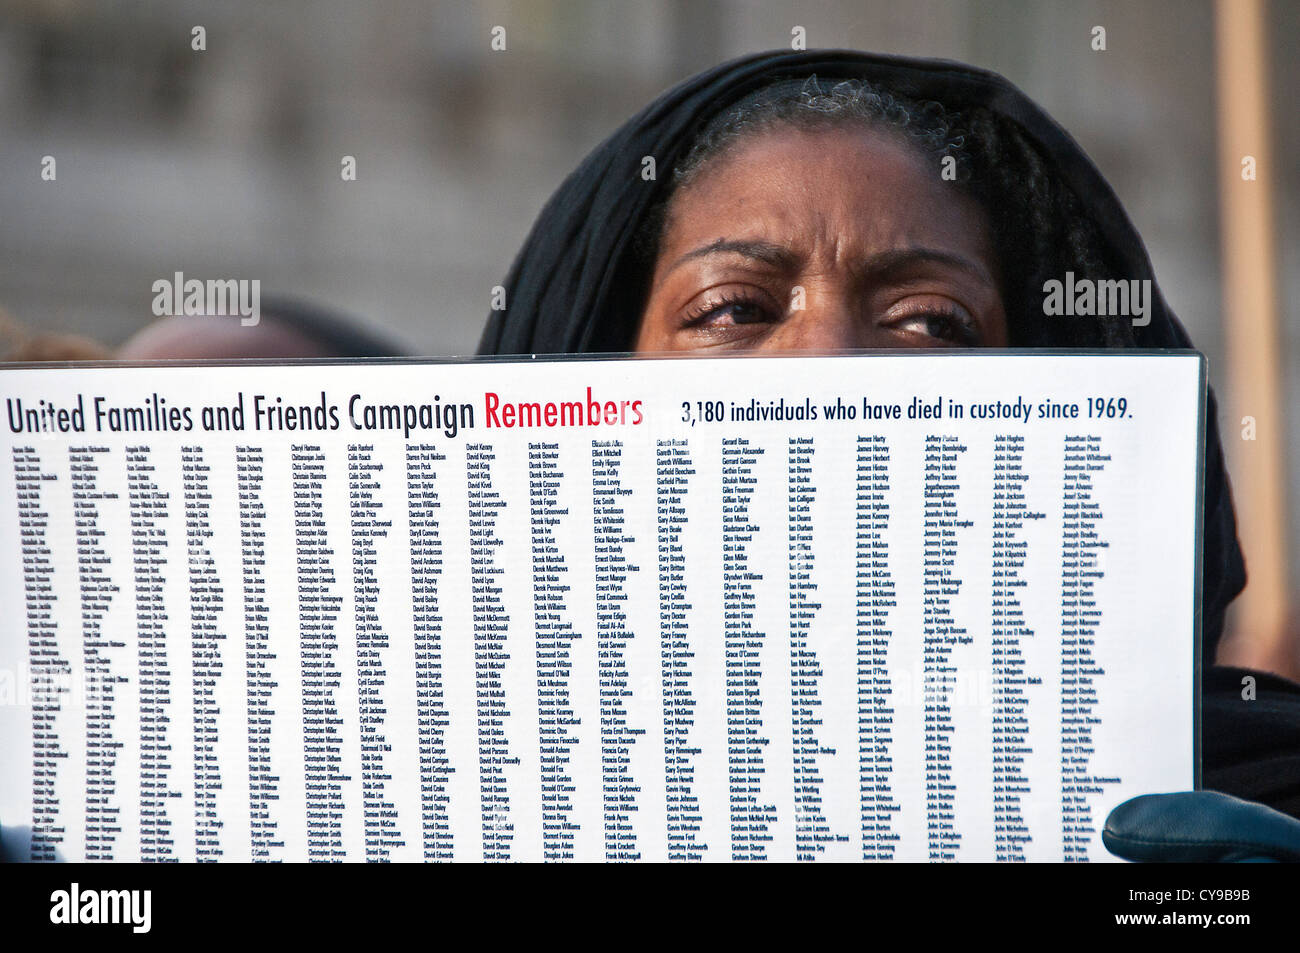 Marcia Rigg sister of Sean Rigg who died in custody 2008  holding names of those killed in police custody since 1969  2012 Londo Stock Photo